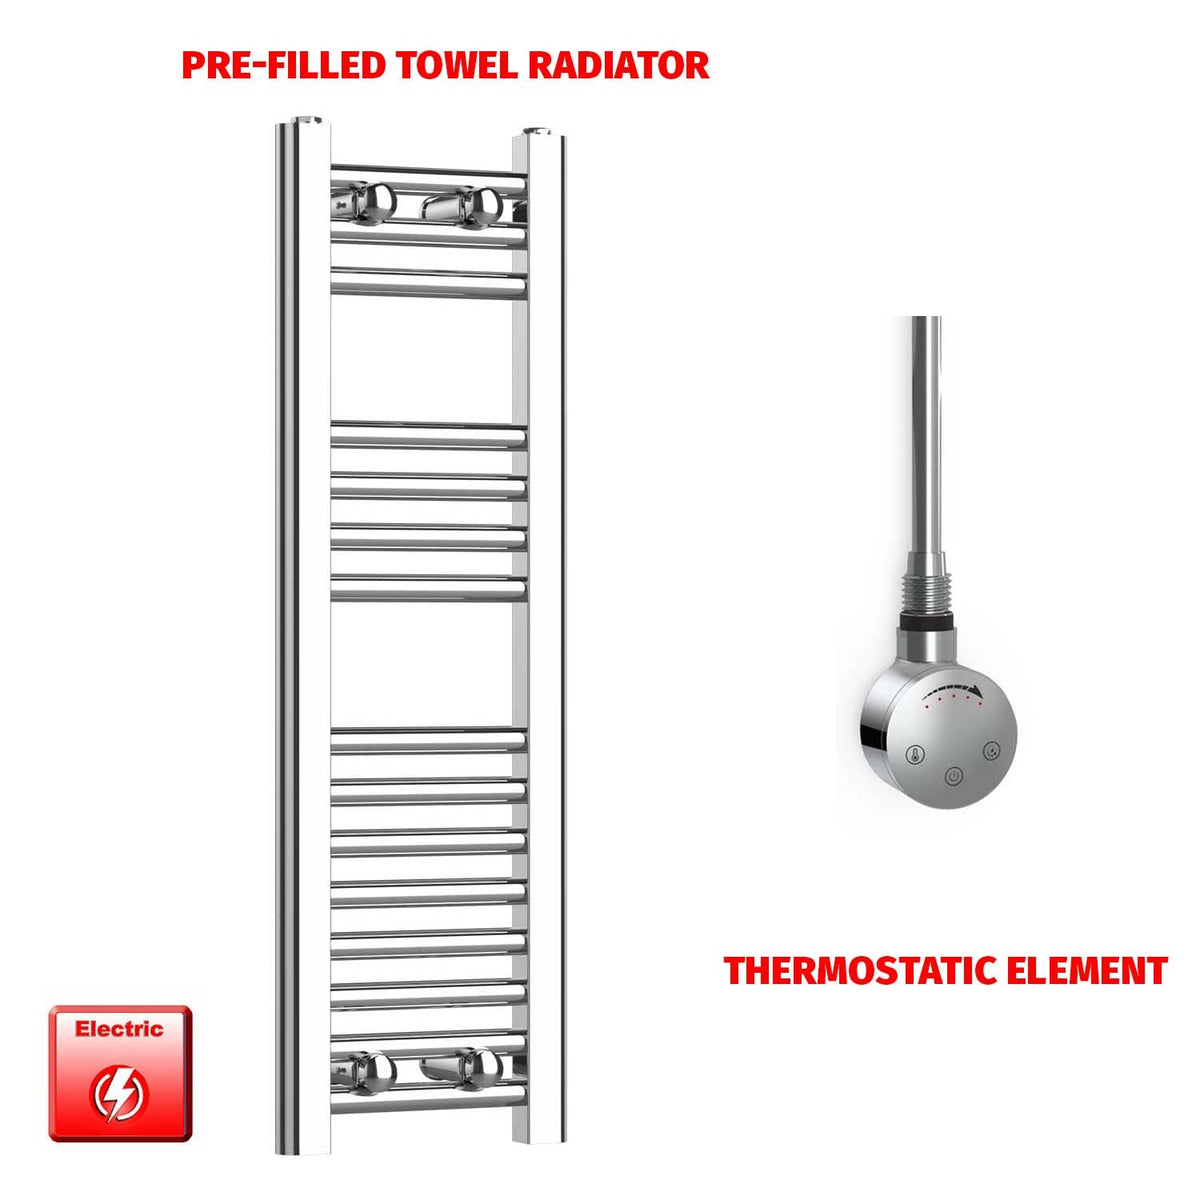 800 x 200 Pre-Filled Electric Heated Towel Radiator Straight Chrome Smart element no timer